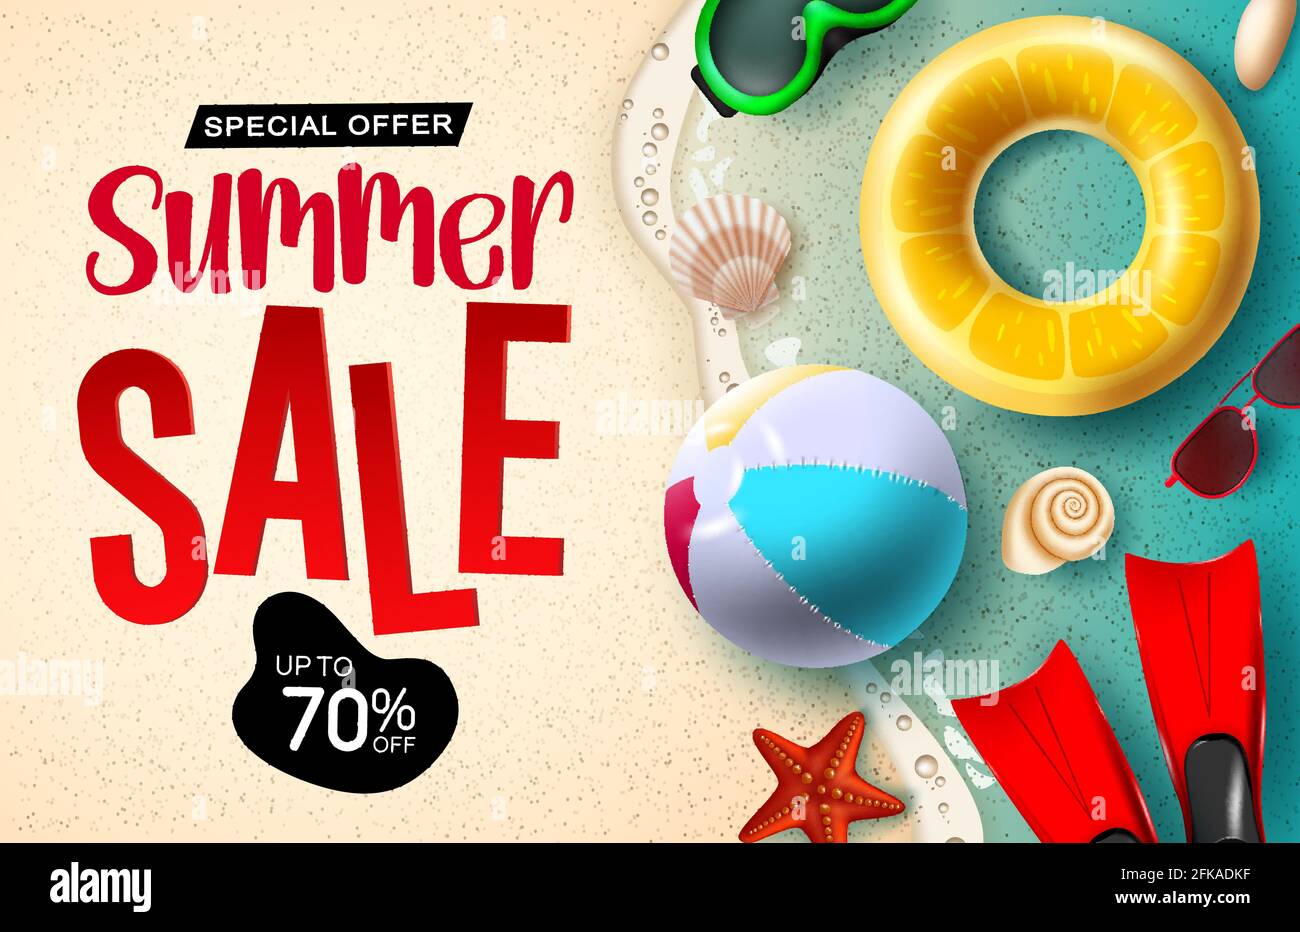 Sumer sale vector banner design. Summer sale 3d text up to 70% off discount with beach ball, floater and sunglasses element for summer special offer. Stock Vector